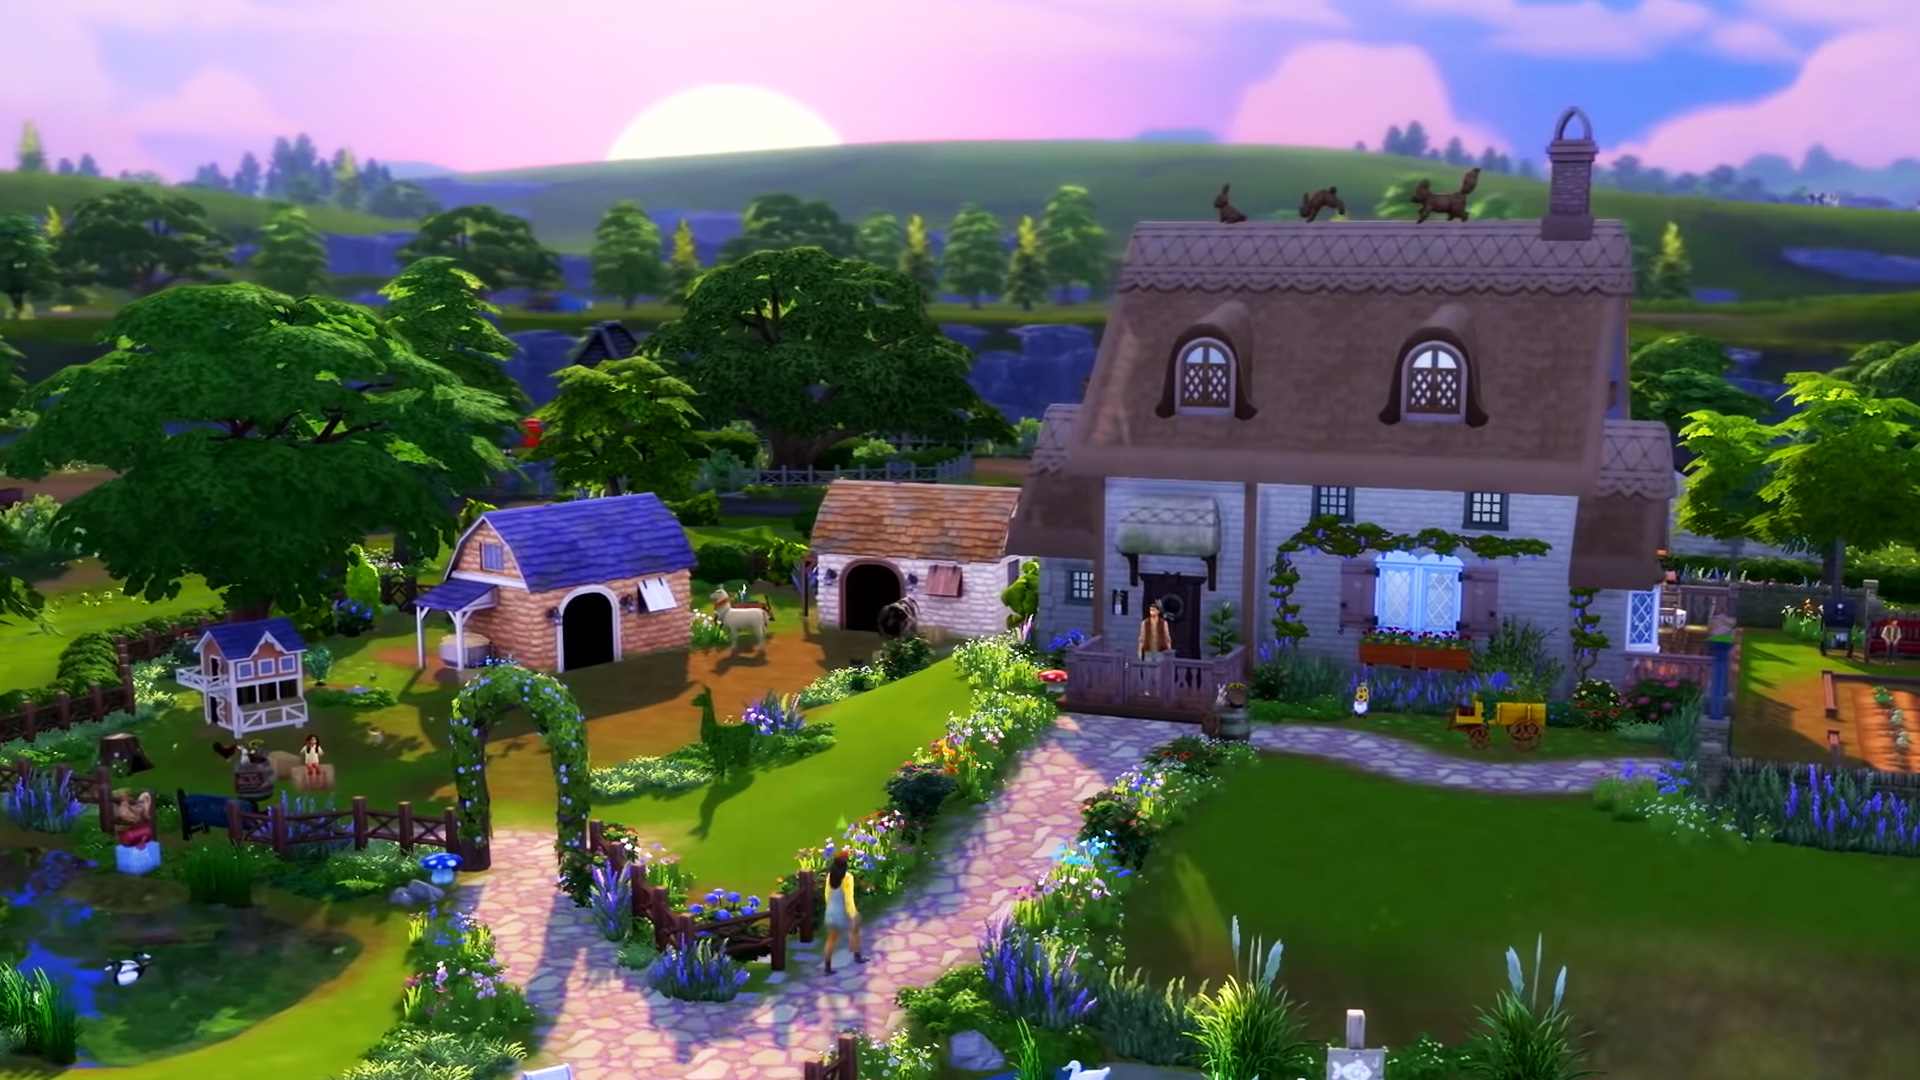 The Sims 4 Cottage Living የተለቀቀበት ቀን